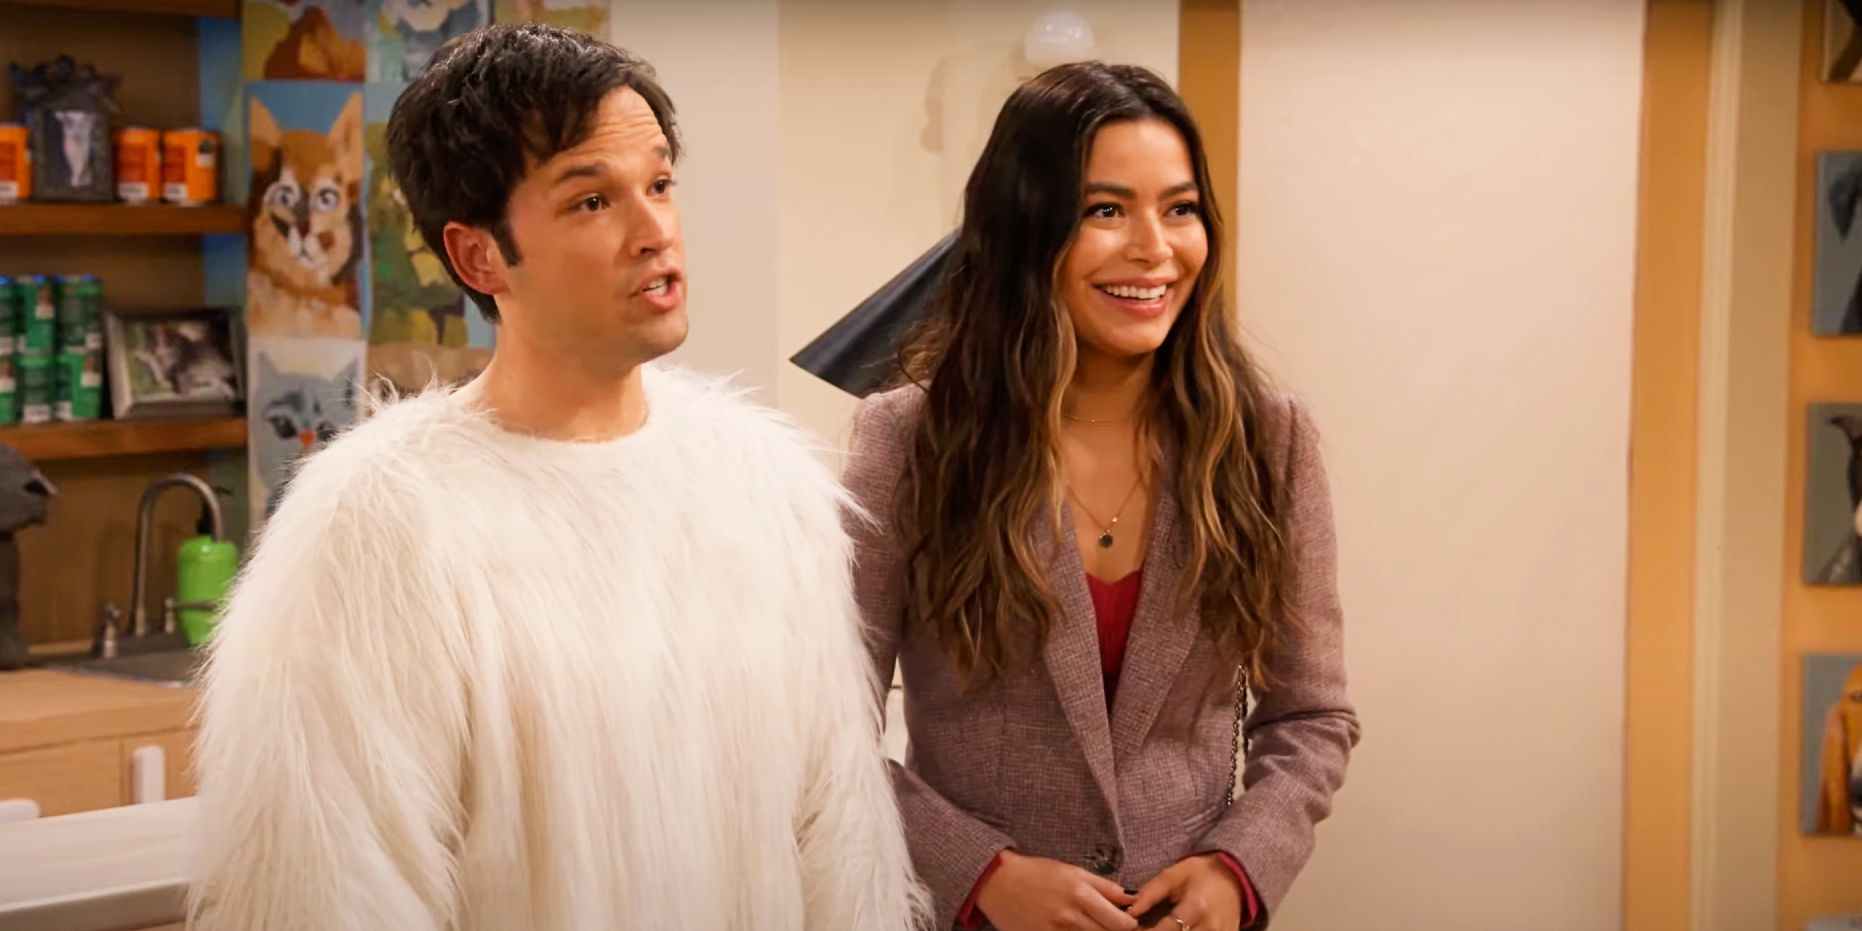 Miranda Cosgrove and Nathan Kress as Carly and Freddie standing together in the iCarly revival